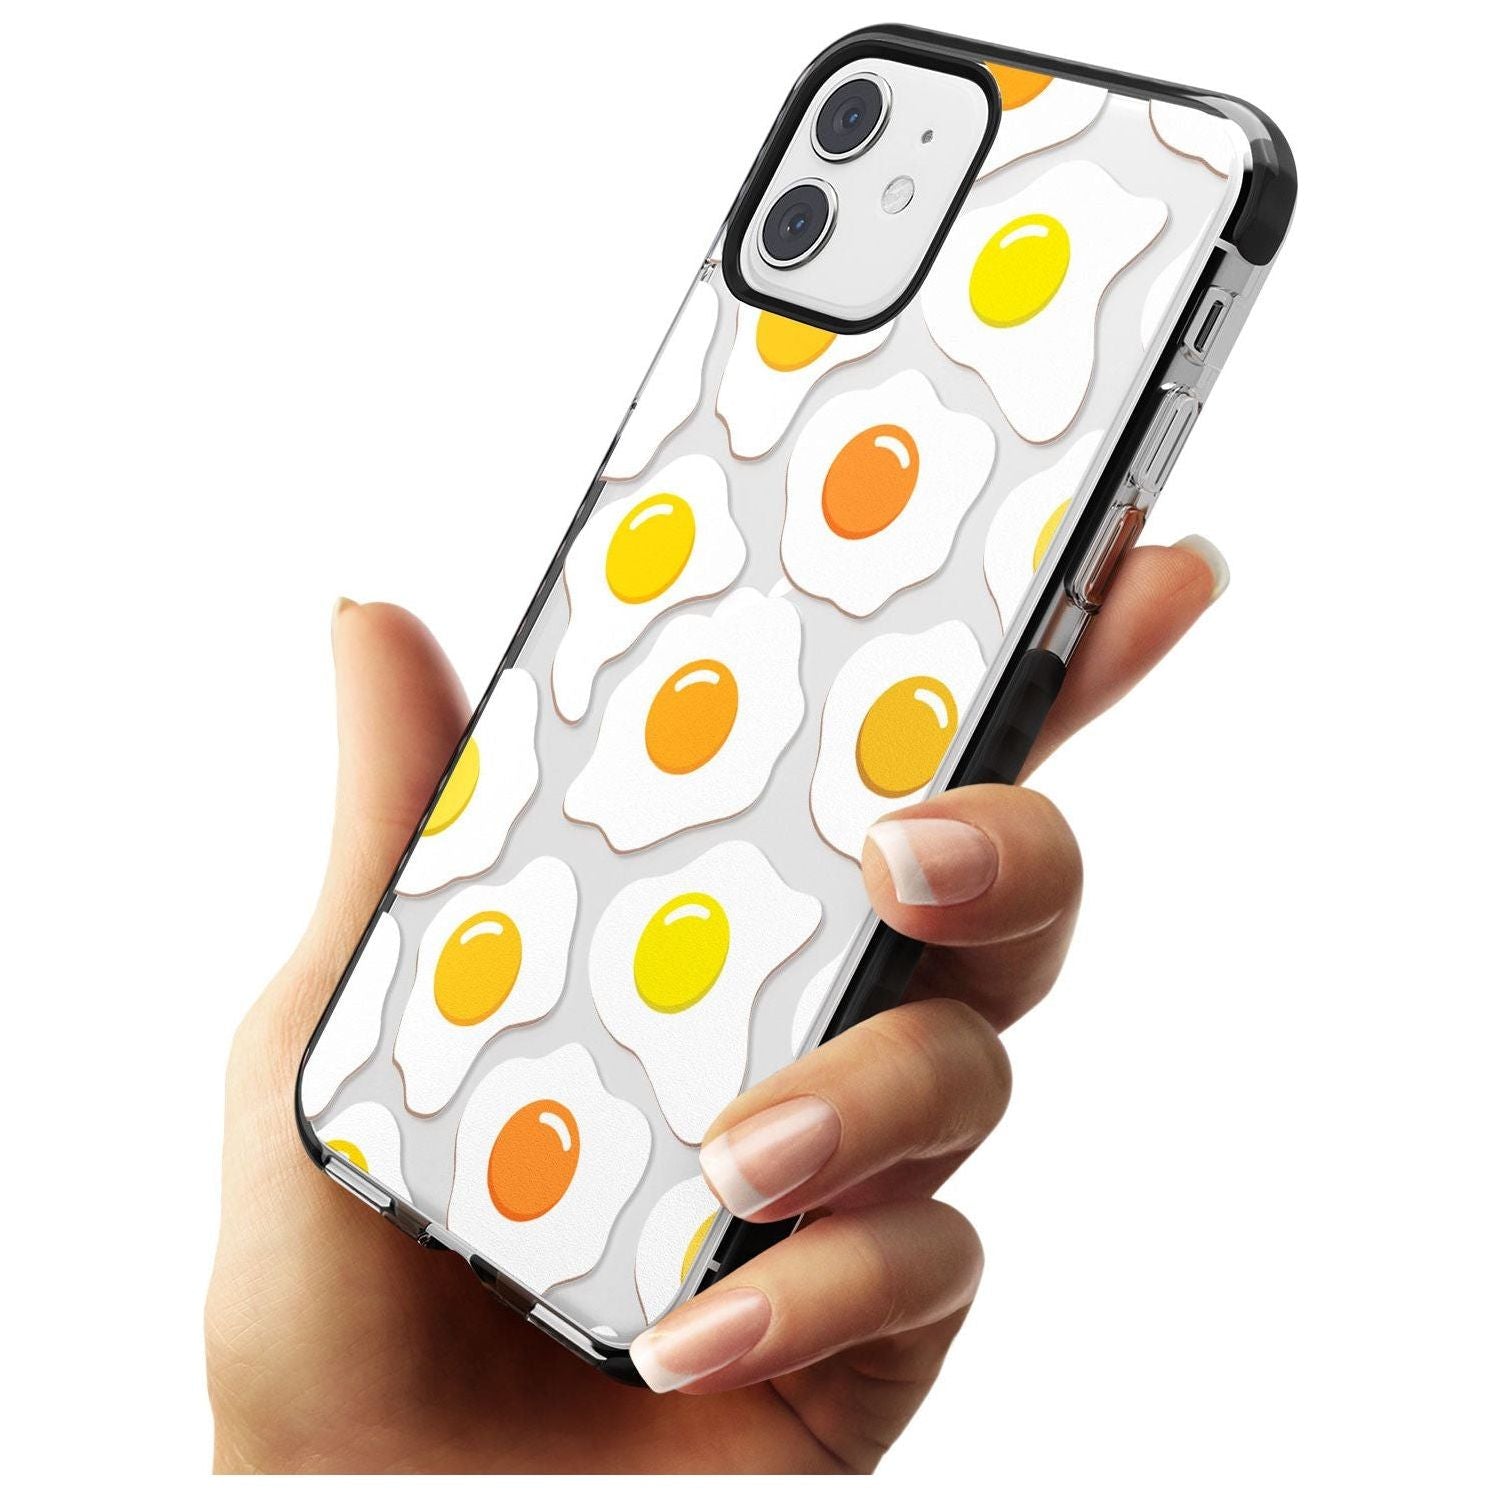 Fried Egg Pattern Black Impact Phone Case for iPhone 11 Pro Max